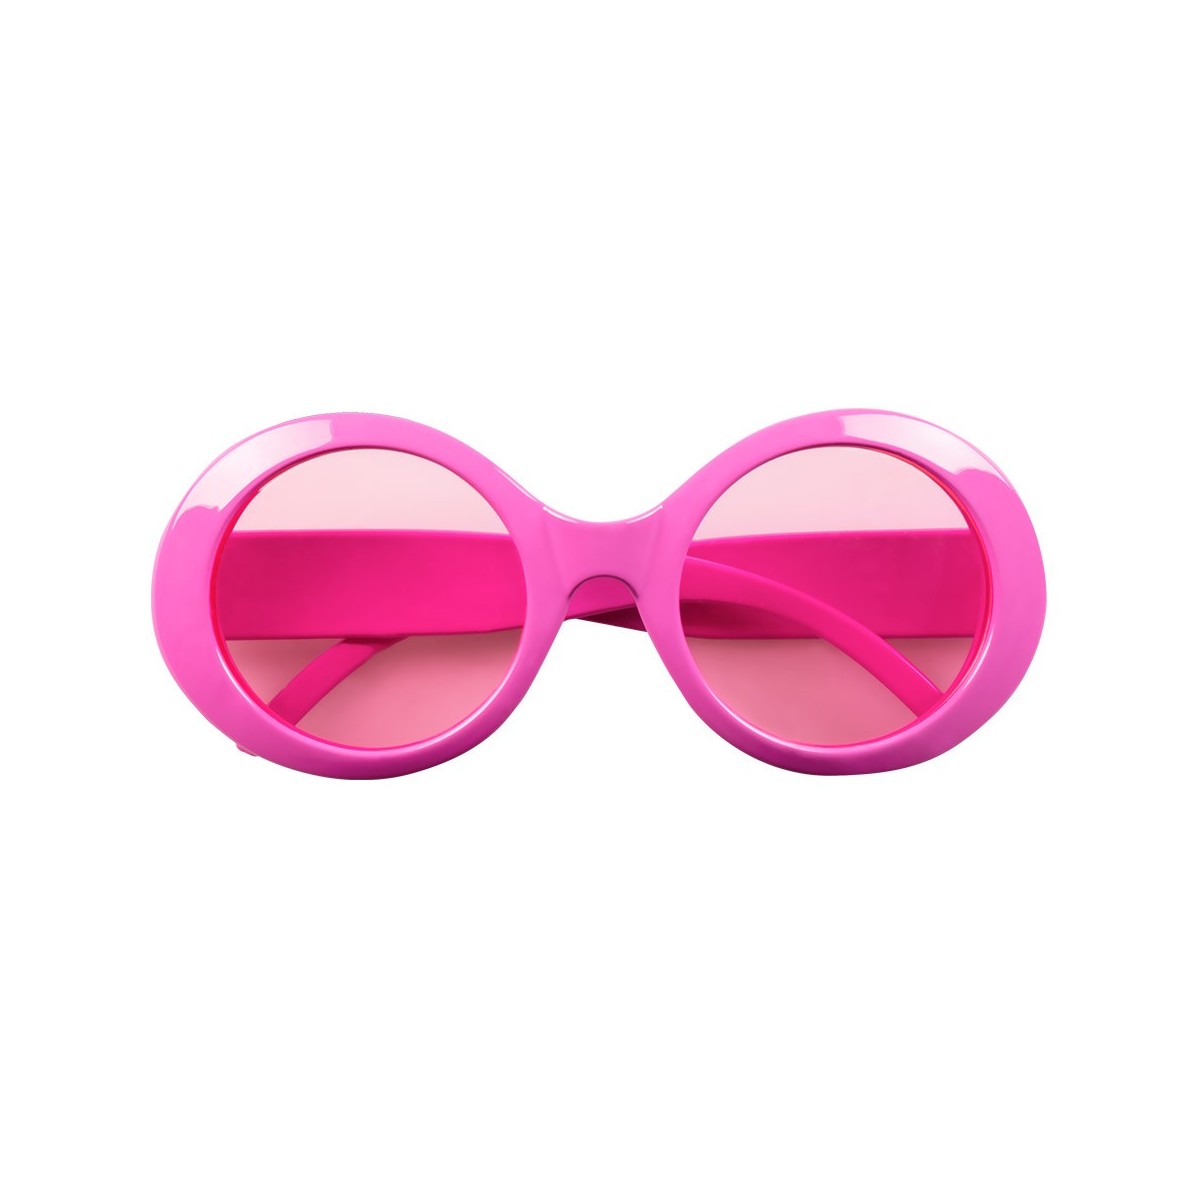 Lunettes Jackie Fluo rose